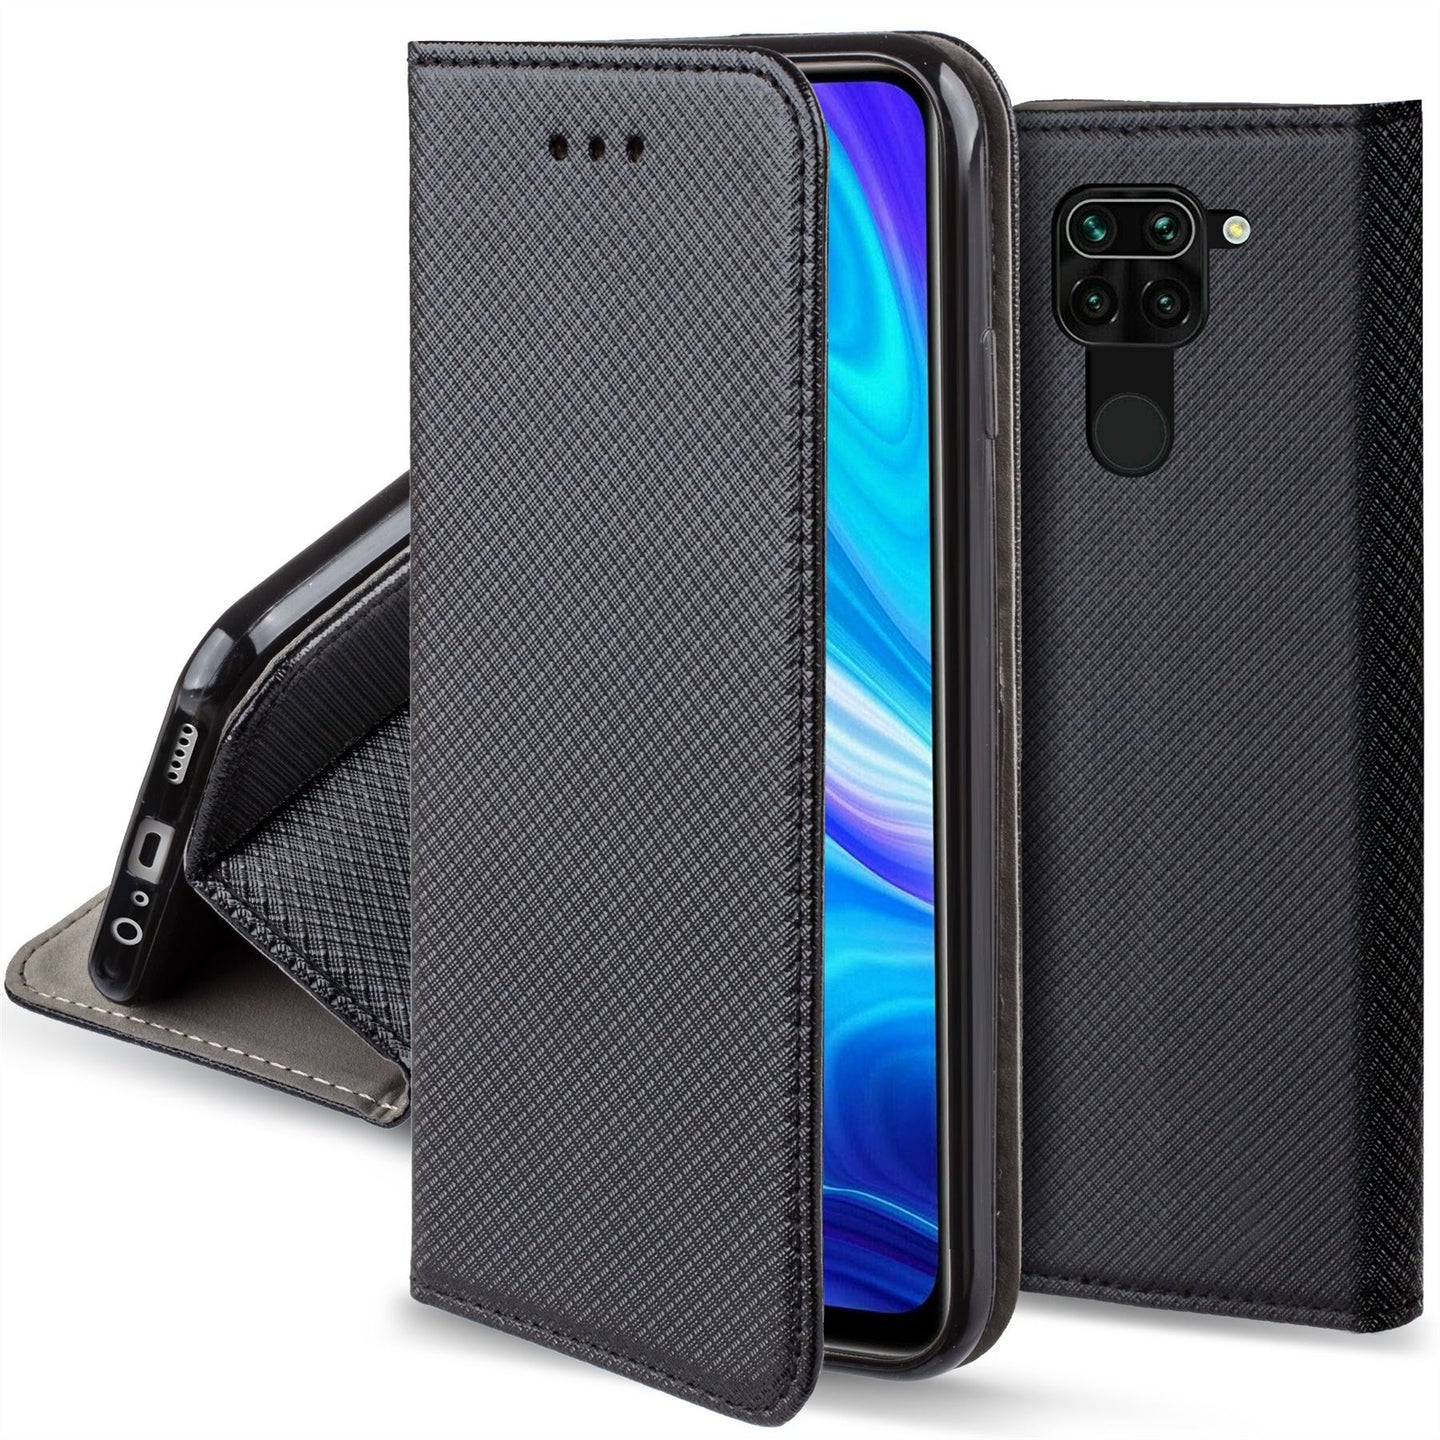 Moozy Case Flip Cover for Xiaomi Redmi Note 9, Black - Smart Magnetic Flip Case with Card Holder and Stand